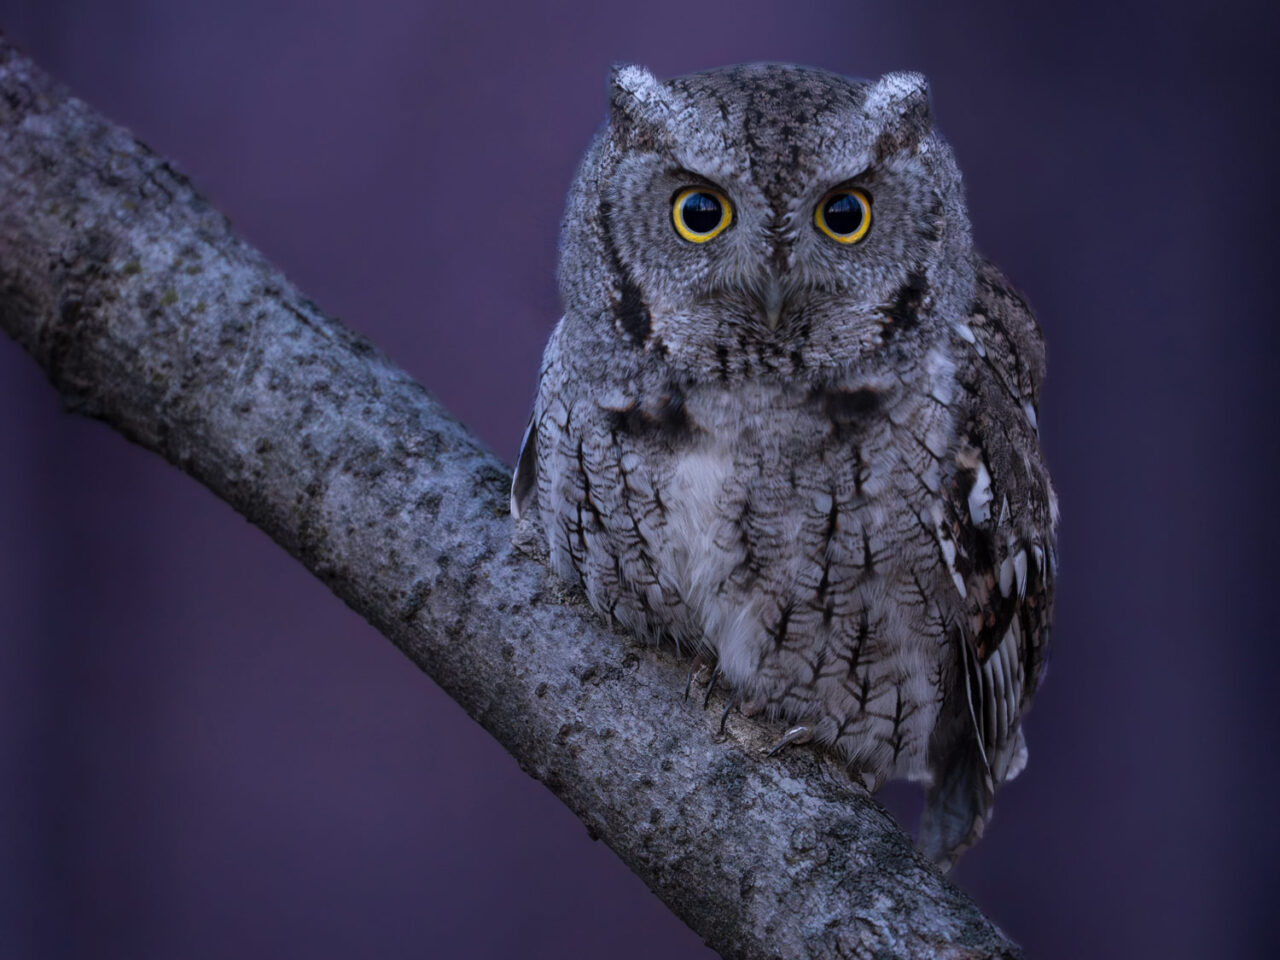 A small owl looks intently at the camera against a dim, purplish background.